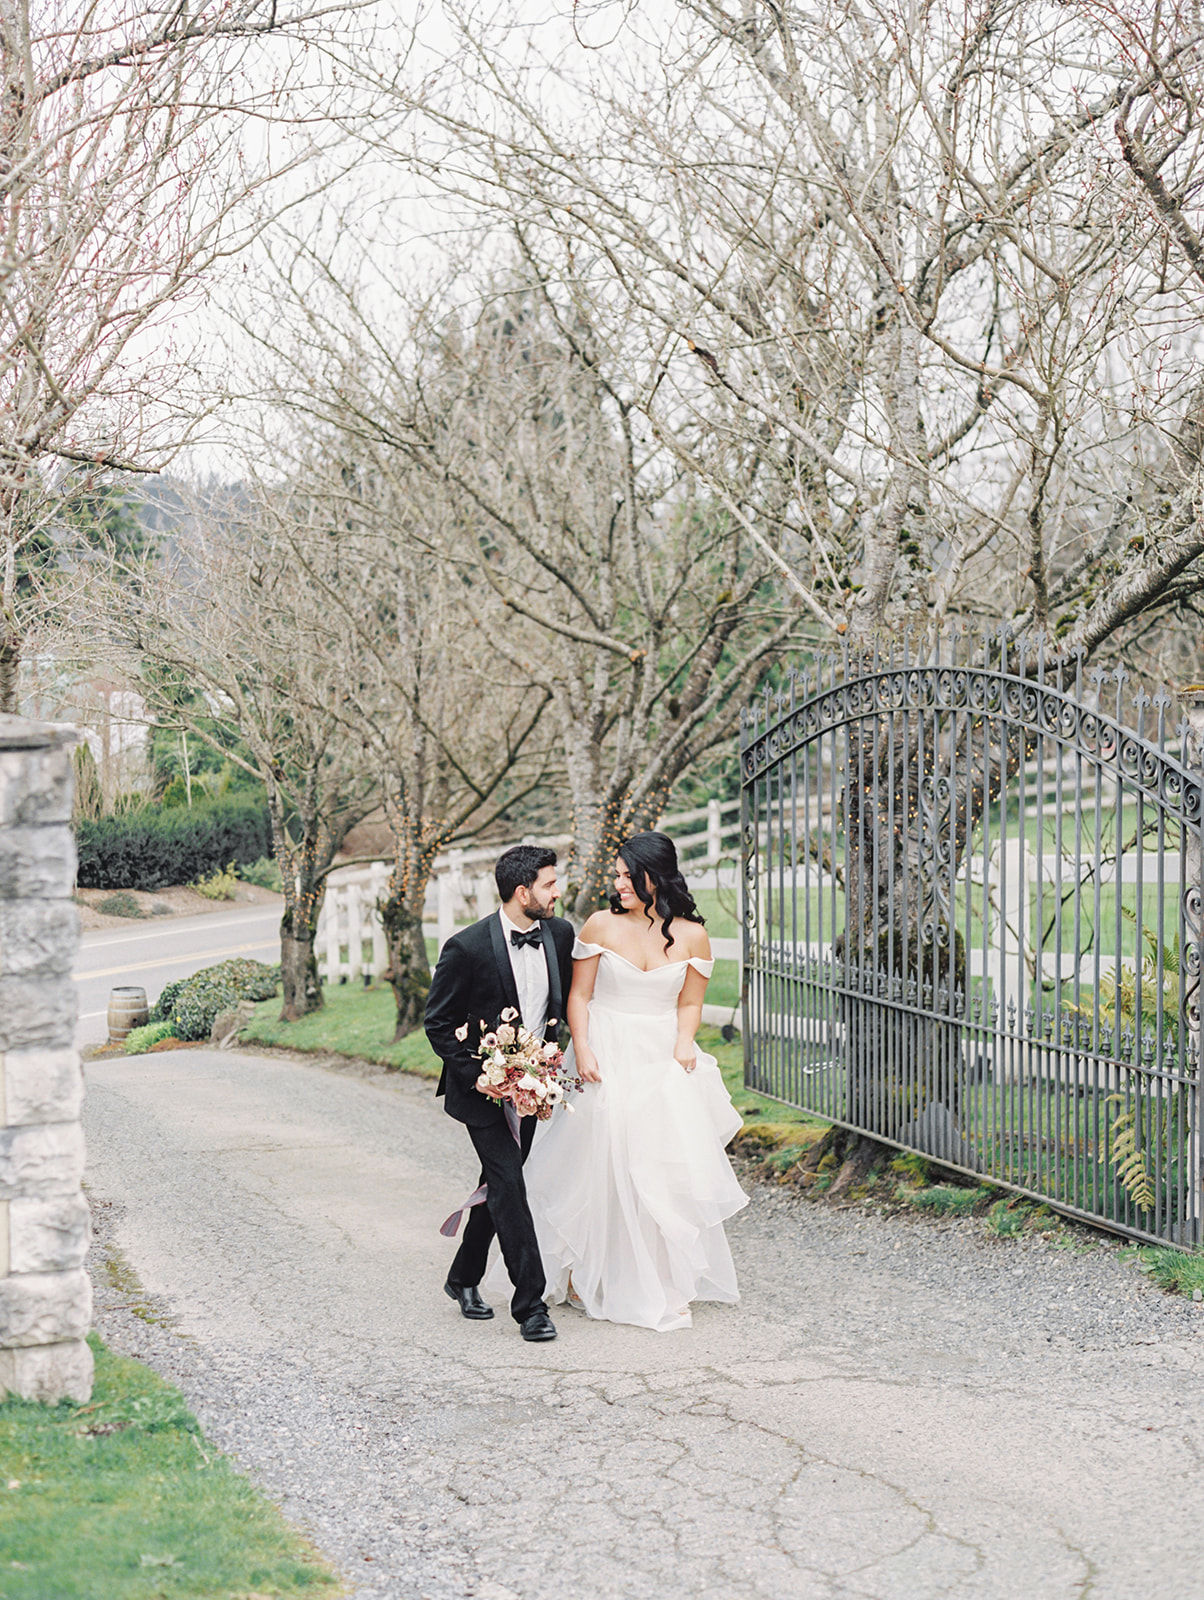 A couple walking up the entrance gate to Chateau Lill for their wedding